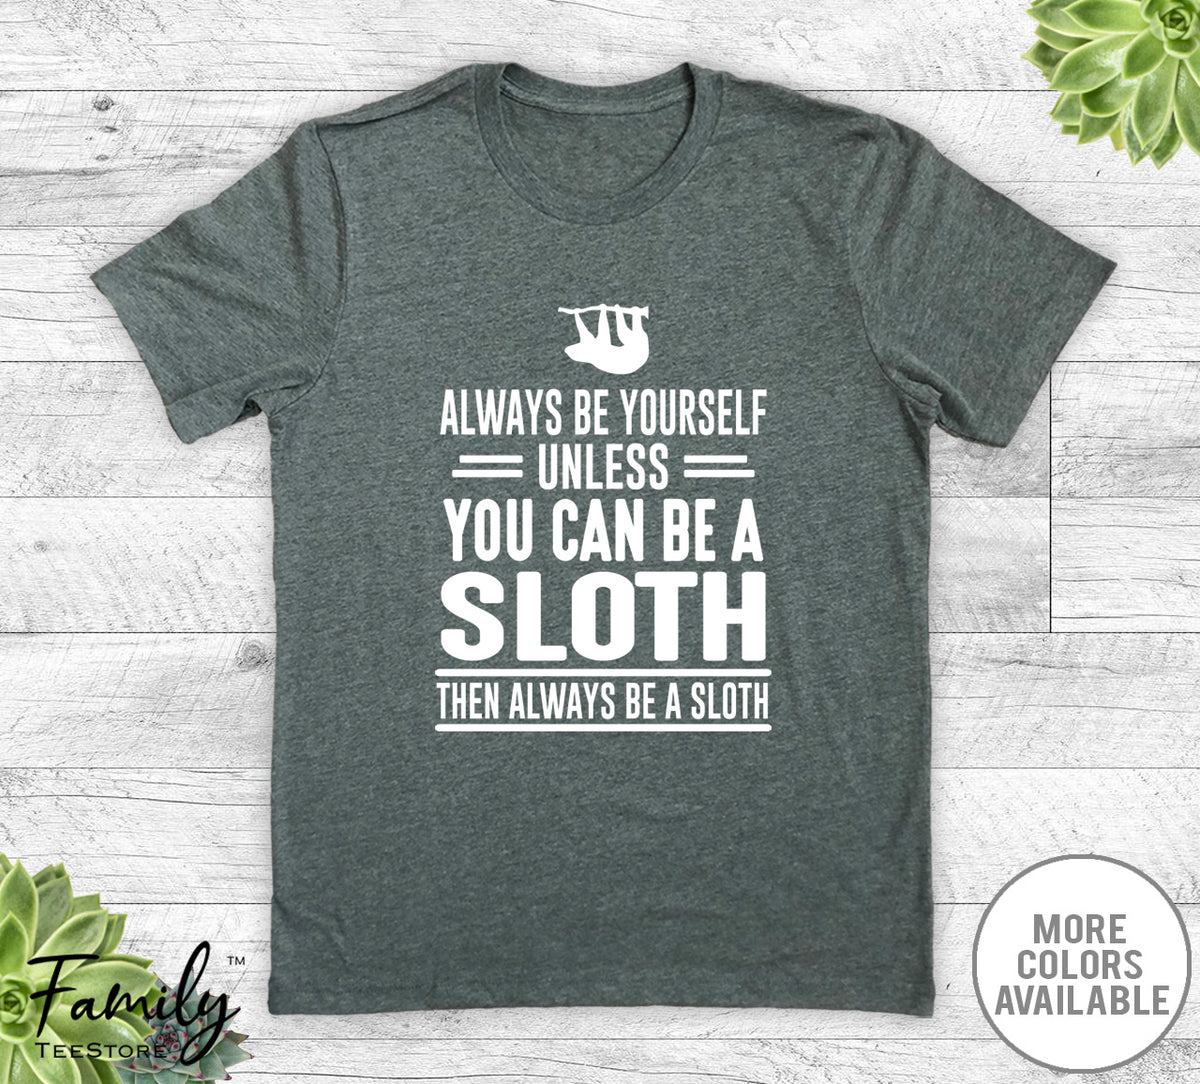 Always Be Yourself Unless You Can Be A Sloth - Unisex T-shirt - Sloth Shirt - Sloth Gift